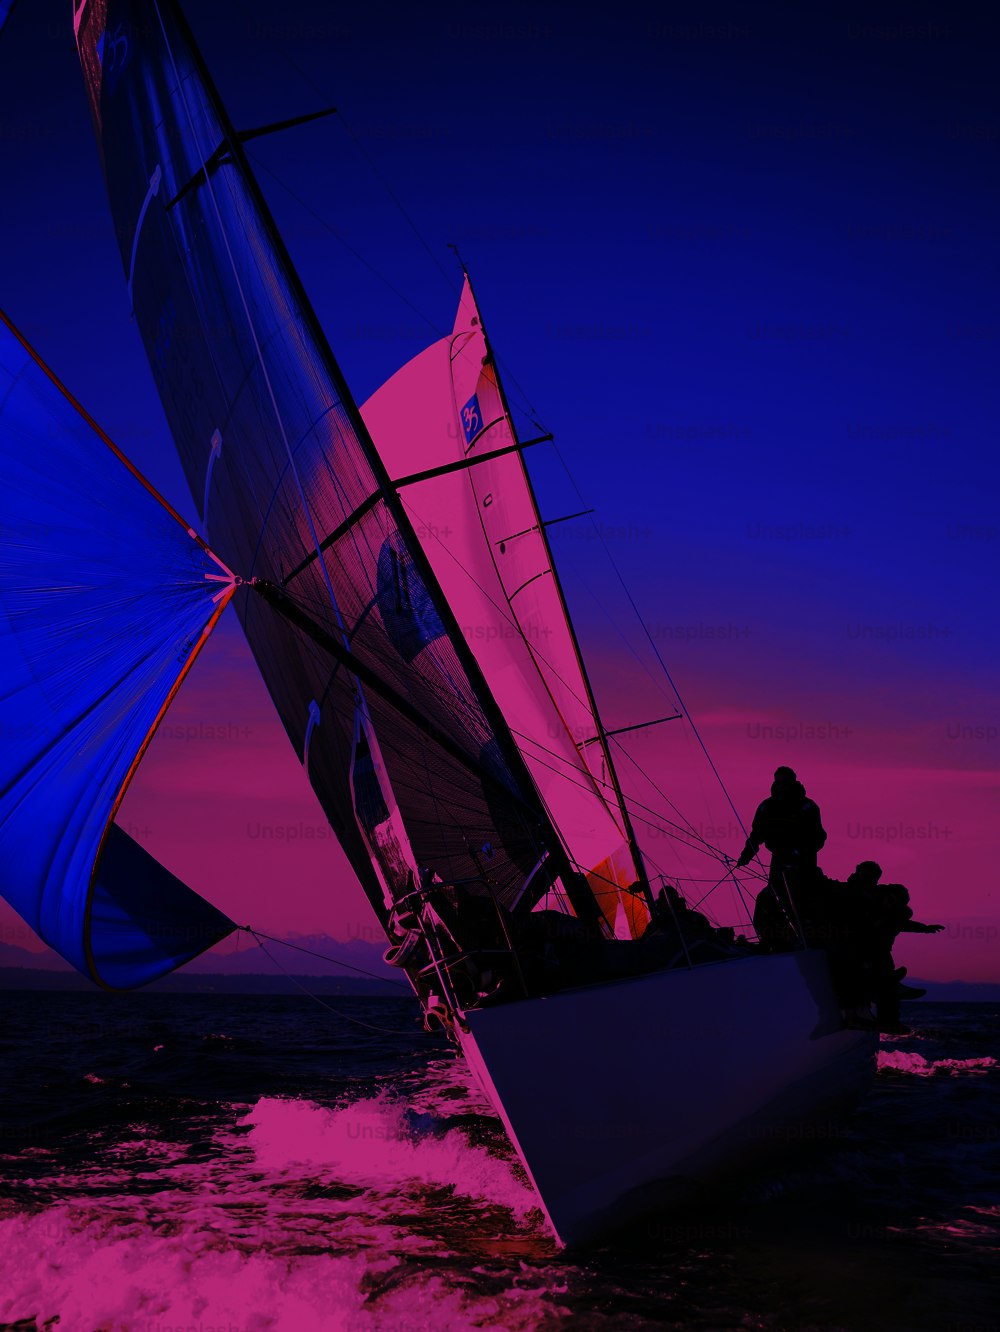 two people on a sailboat in the ocean